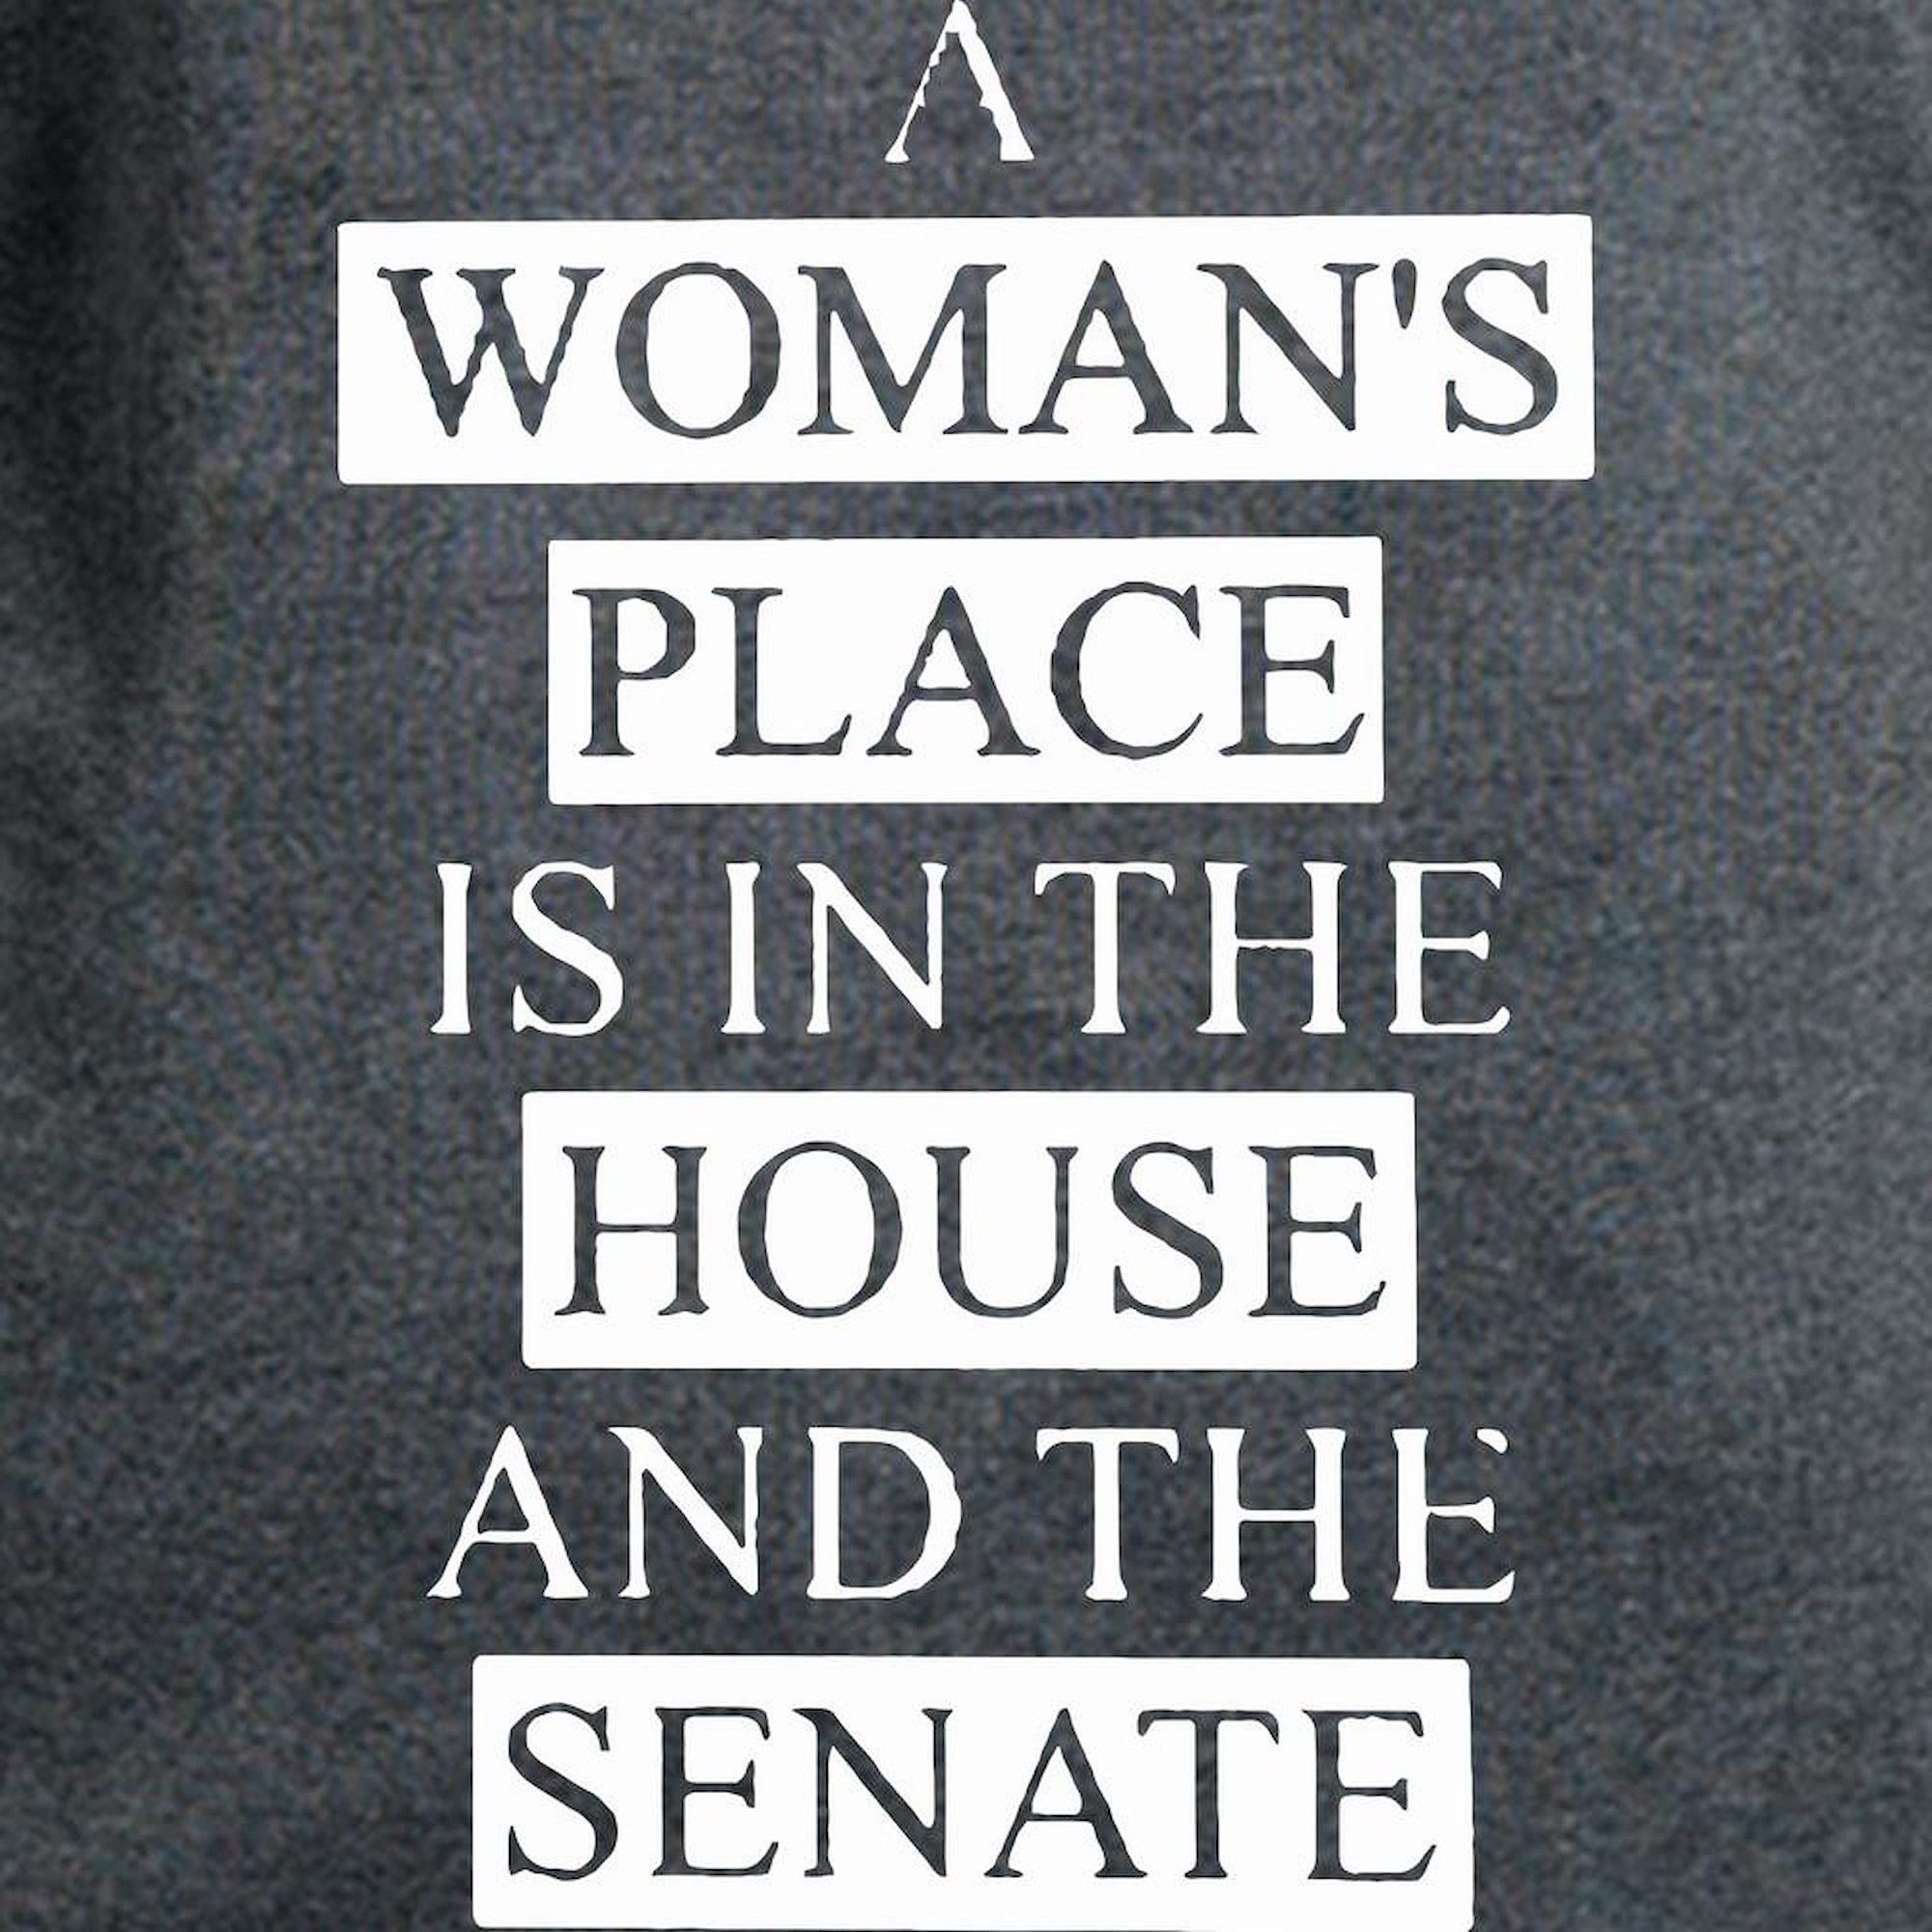 CafePress - A Woman Place Is In The House Shirt T Shirt - Women's Traditional Fit Dark T-Shirt - image 3 of 4